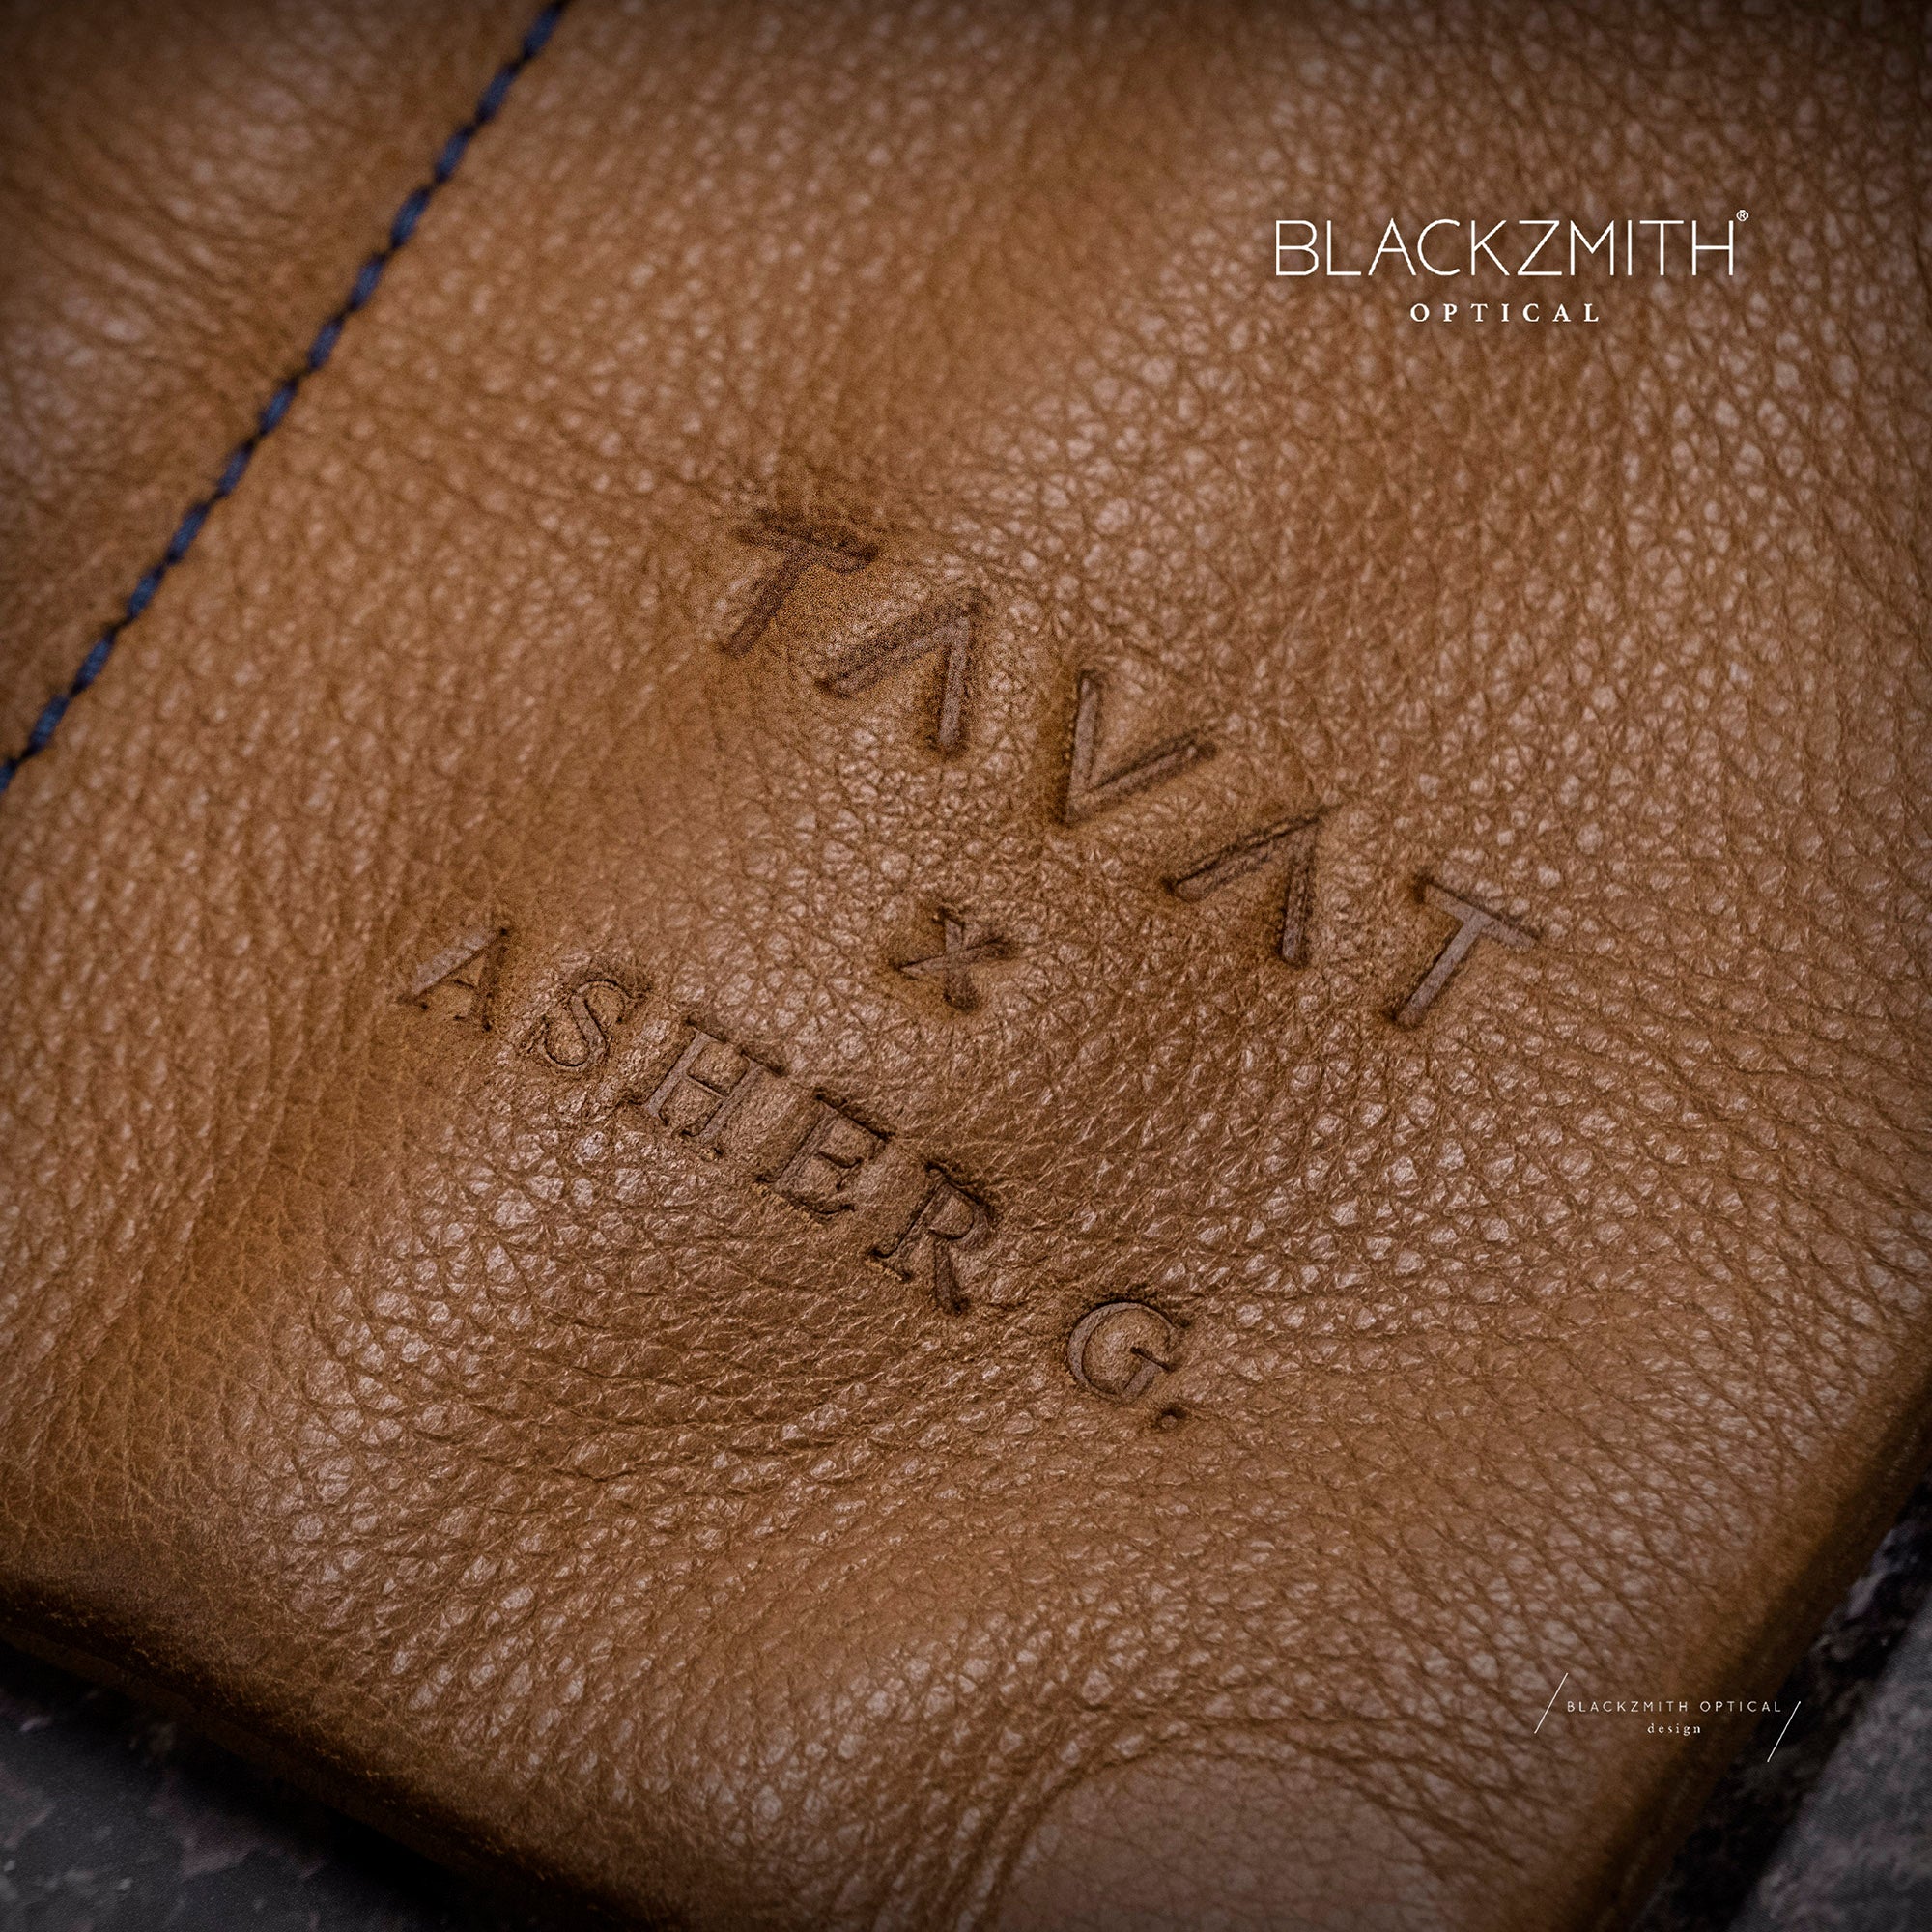 TAVAT x Asher G. Soft Pouch Leather -WHY (純手工製皮革眼鏡套)【Pre-order Now】